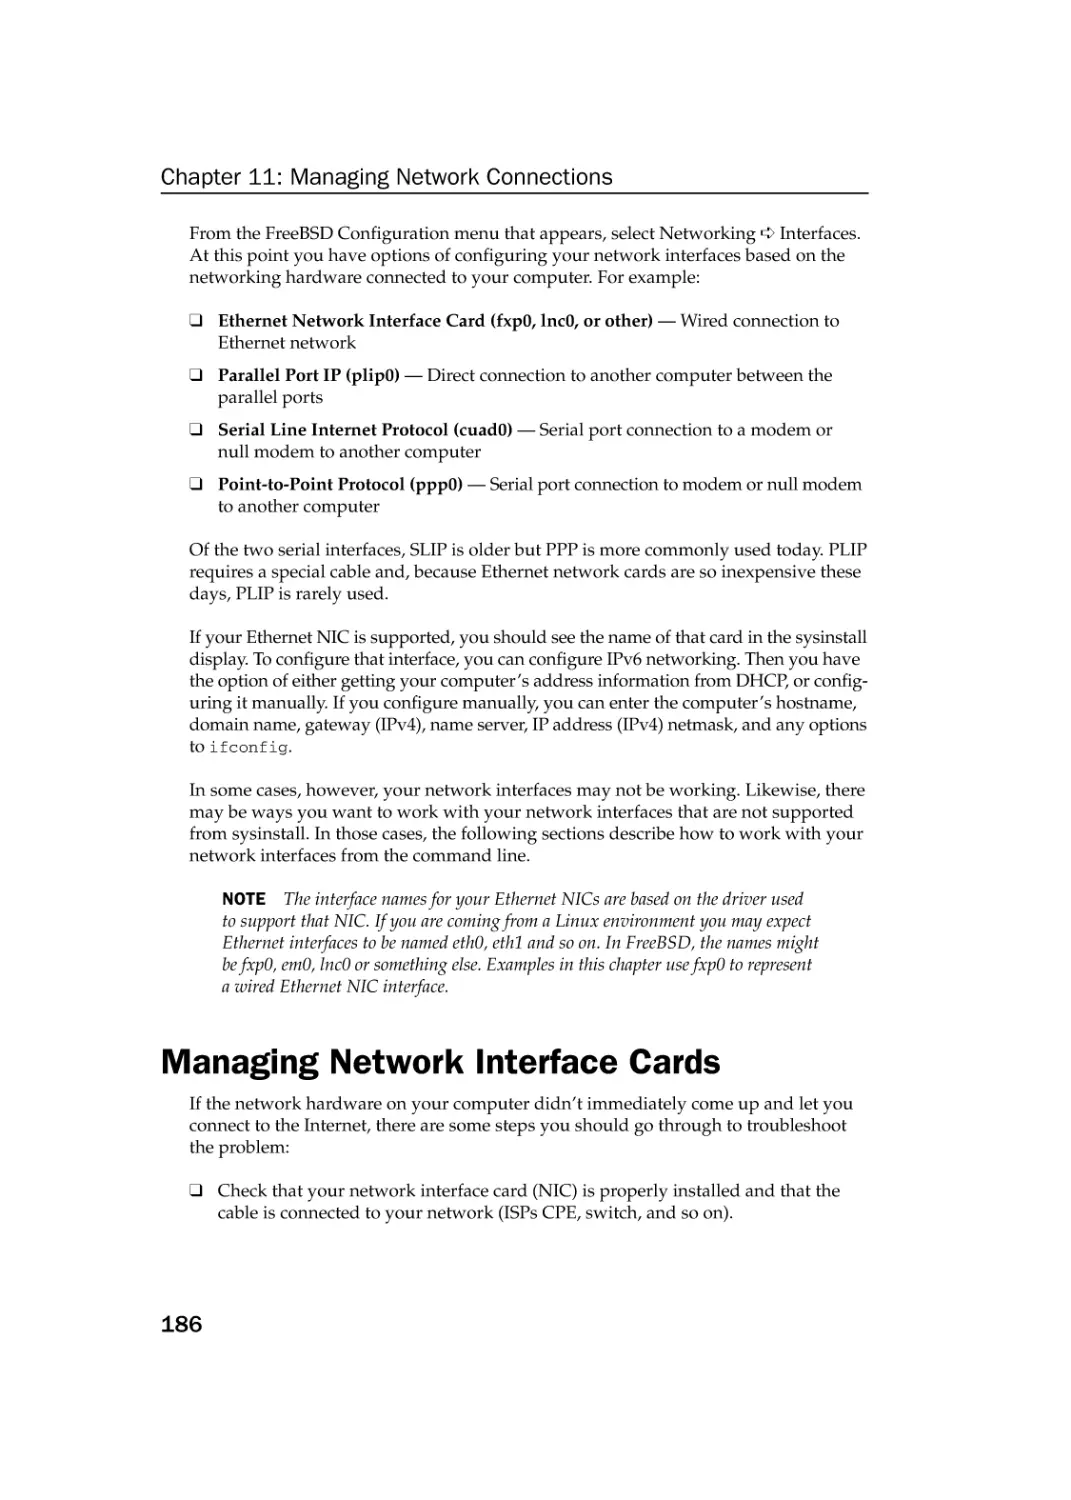 Managing Network Interface Cards